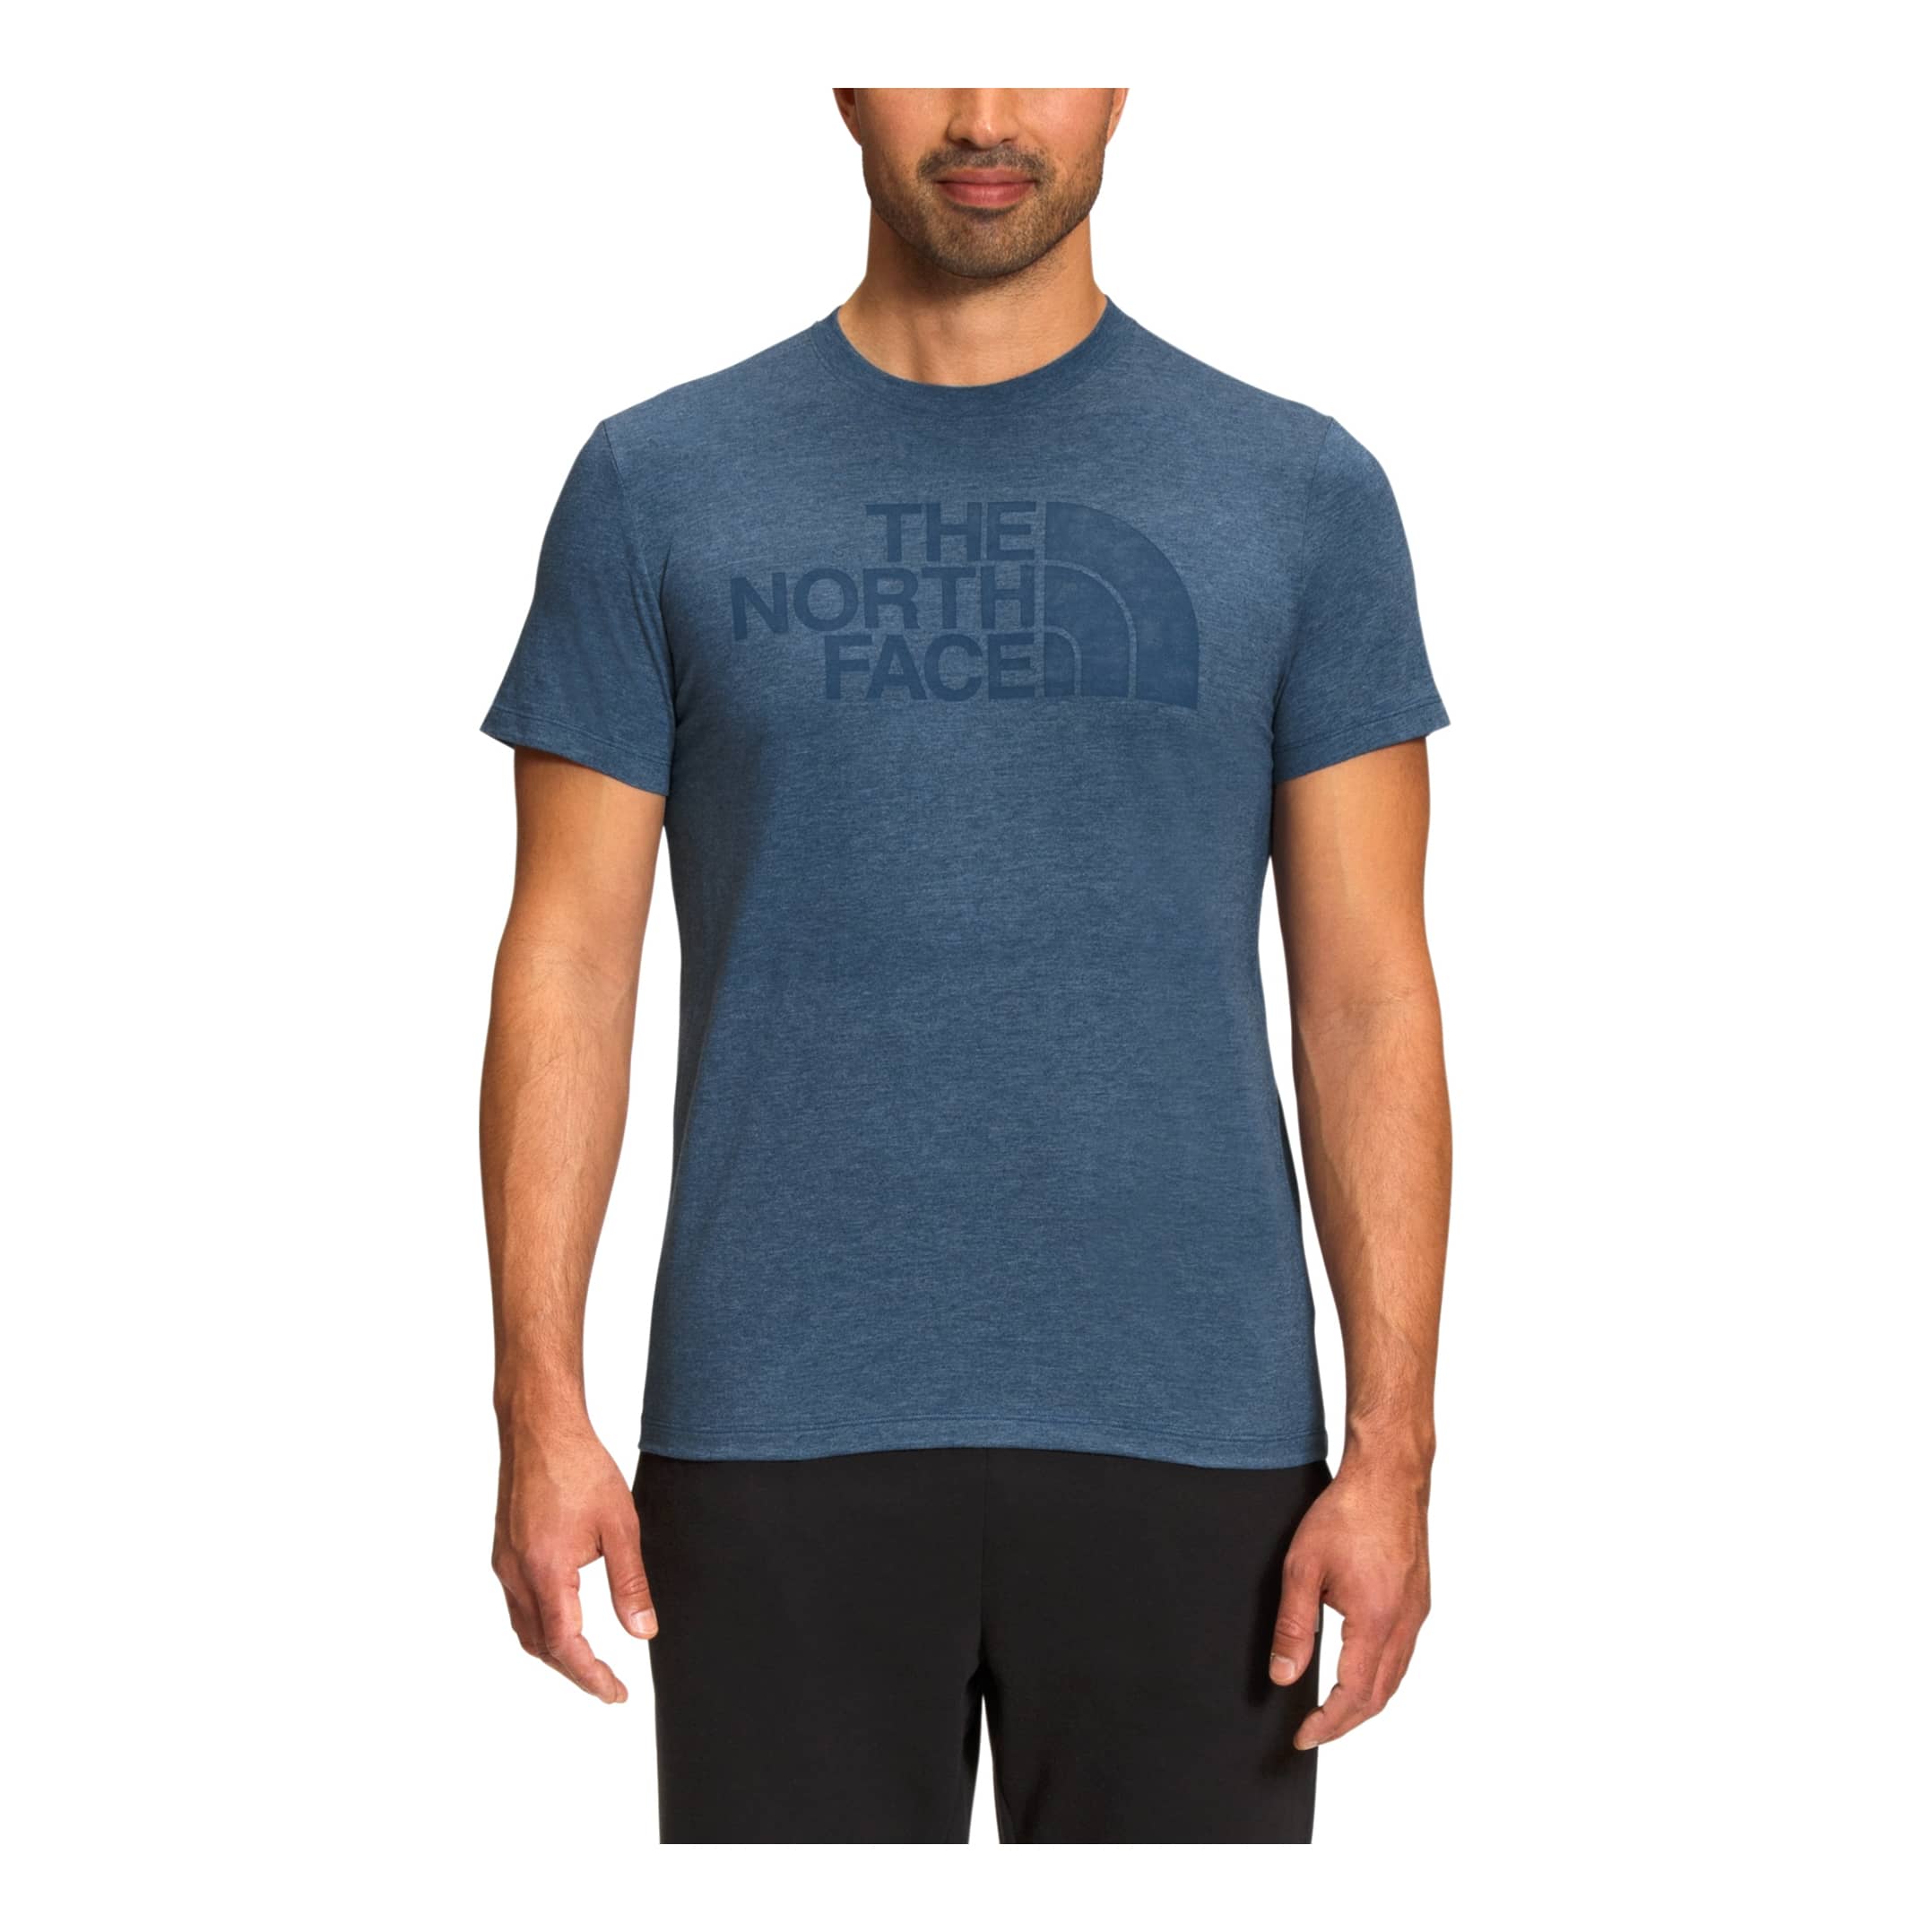 The North Face® Men’s Half Dome Tri-Blend Short-Sleeve T-Shirt - Shady Blue Heather